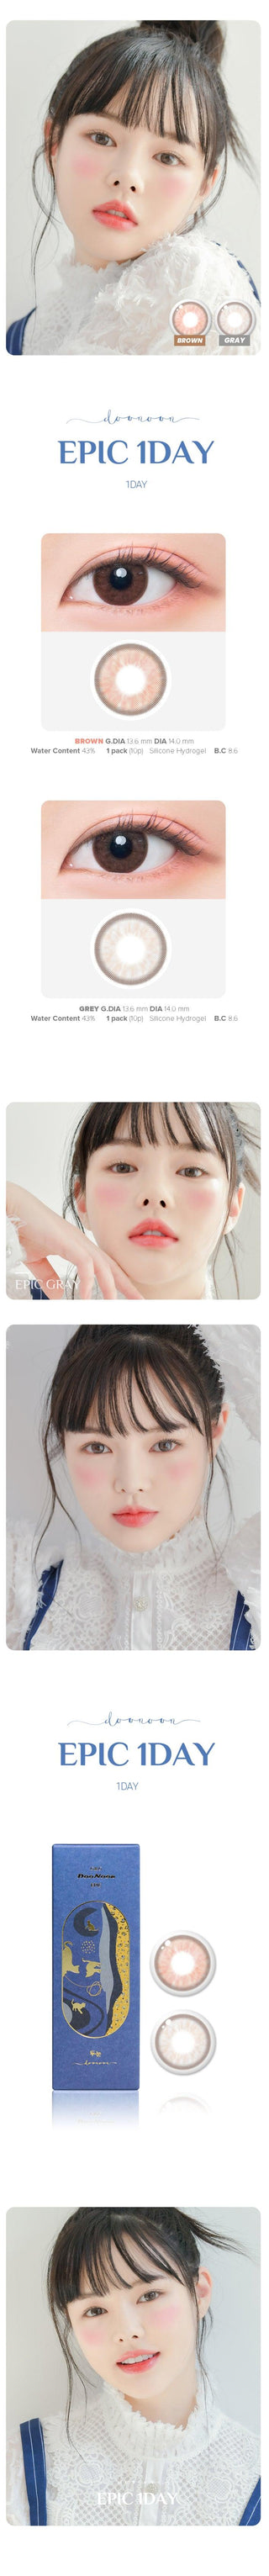 Variety of DooNoon Epic 1-Day Grey (10pk) contact lens colors displayed, with closeups of an eye wearing the contact lens colors, and with a model wearing the contact lens colors showing realistic eye-enlarging effect from various angles.